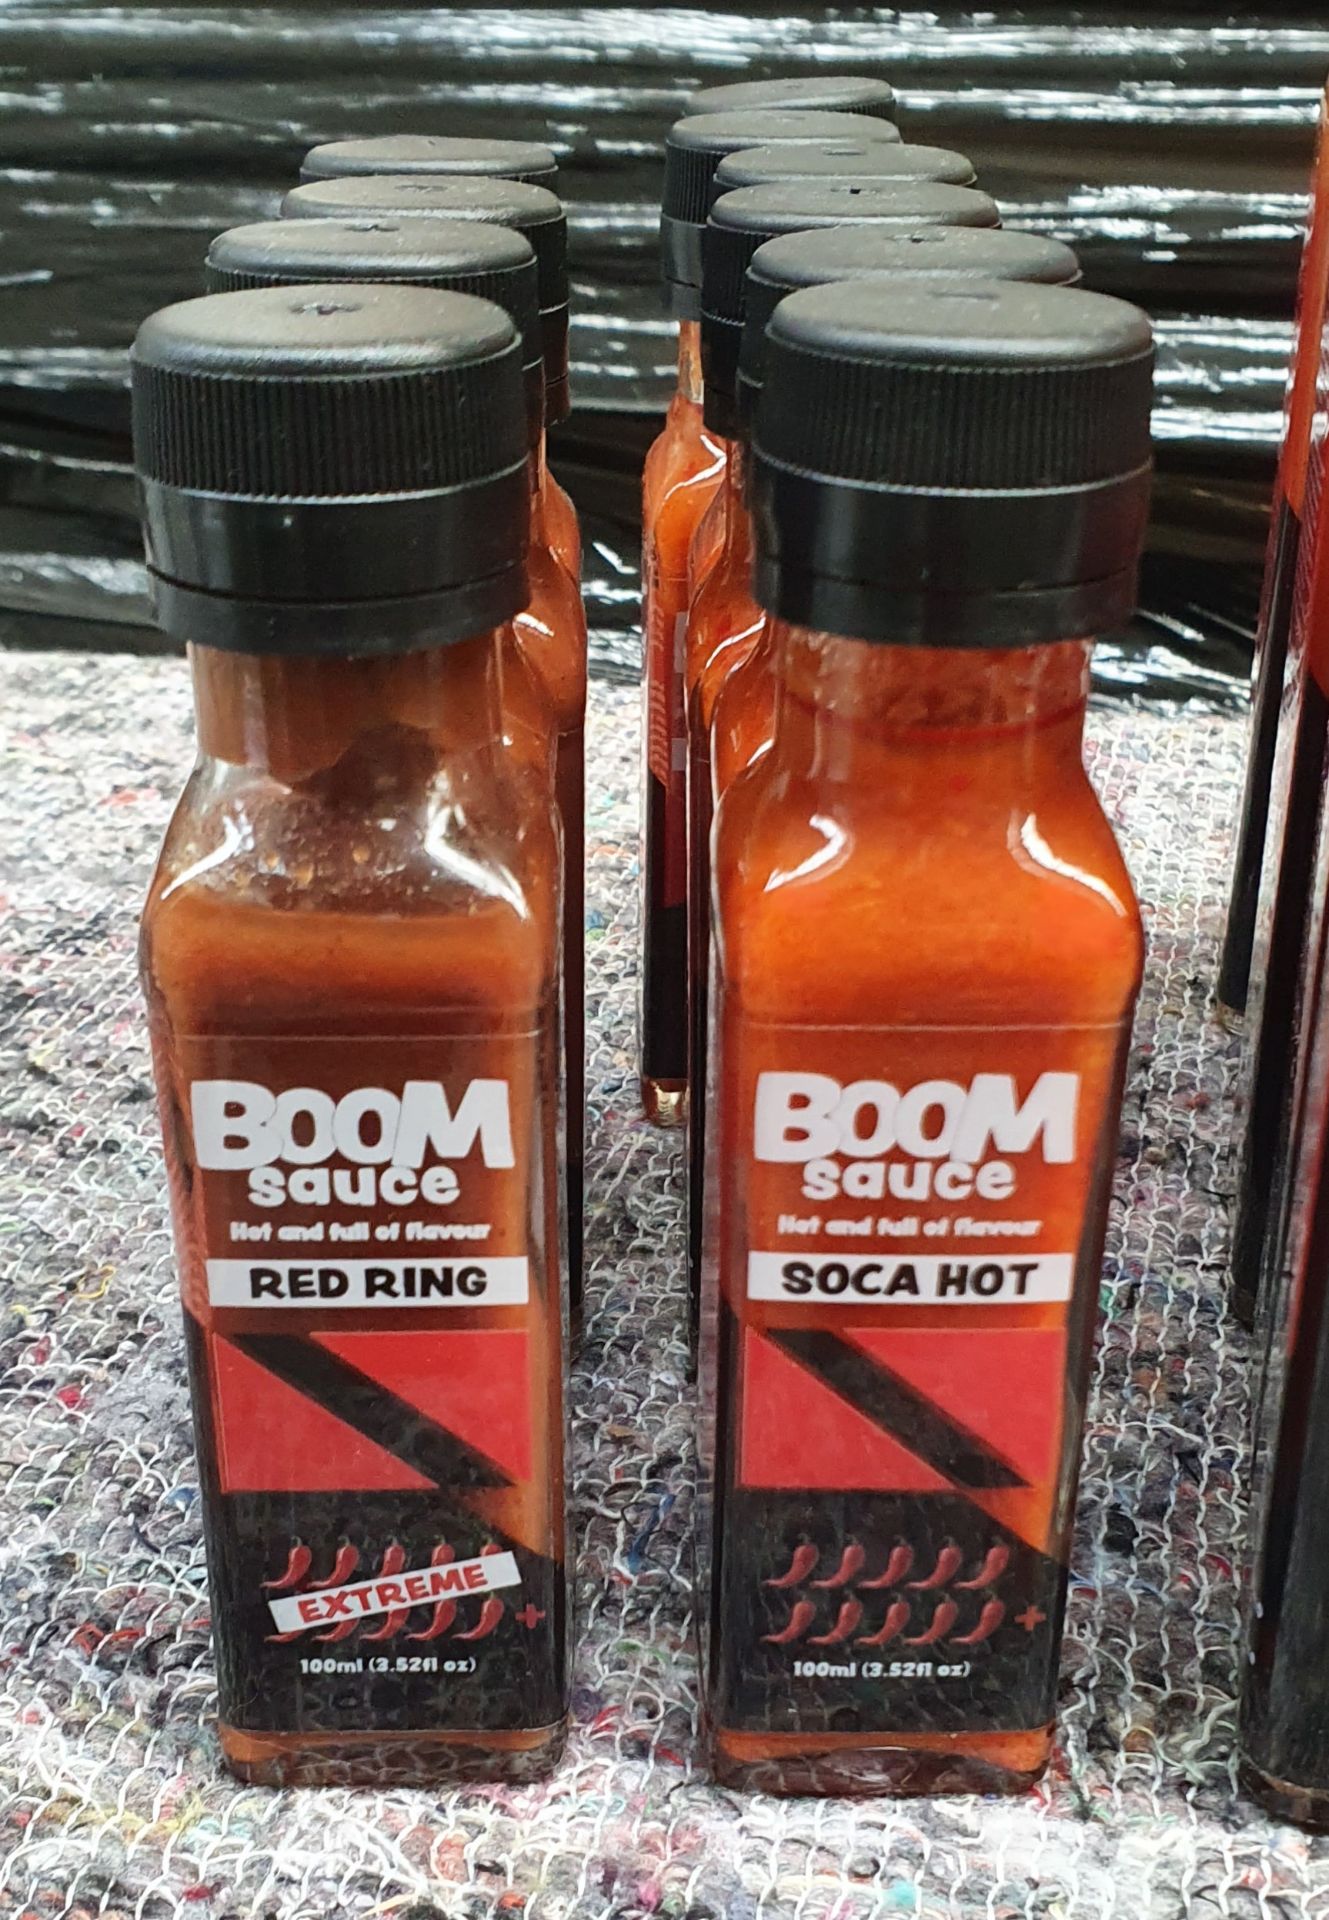 37 x Bottles of Boom Sauce - Ref: TCH433 - CL840 - Location: Altrincham WA14 - Image 2 of 6